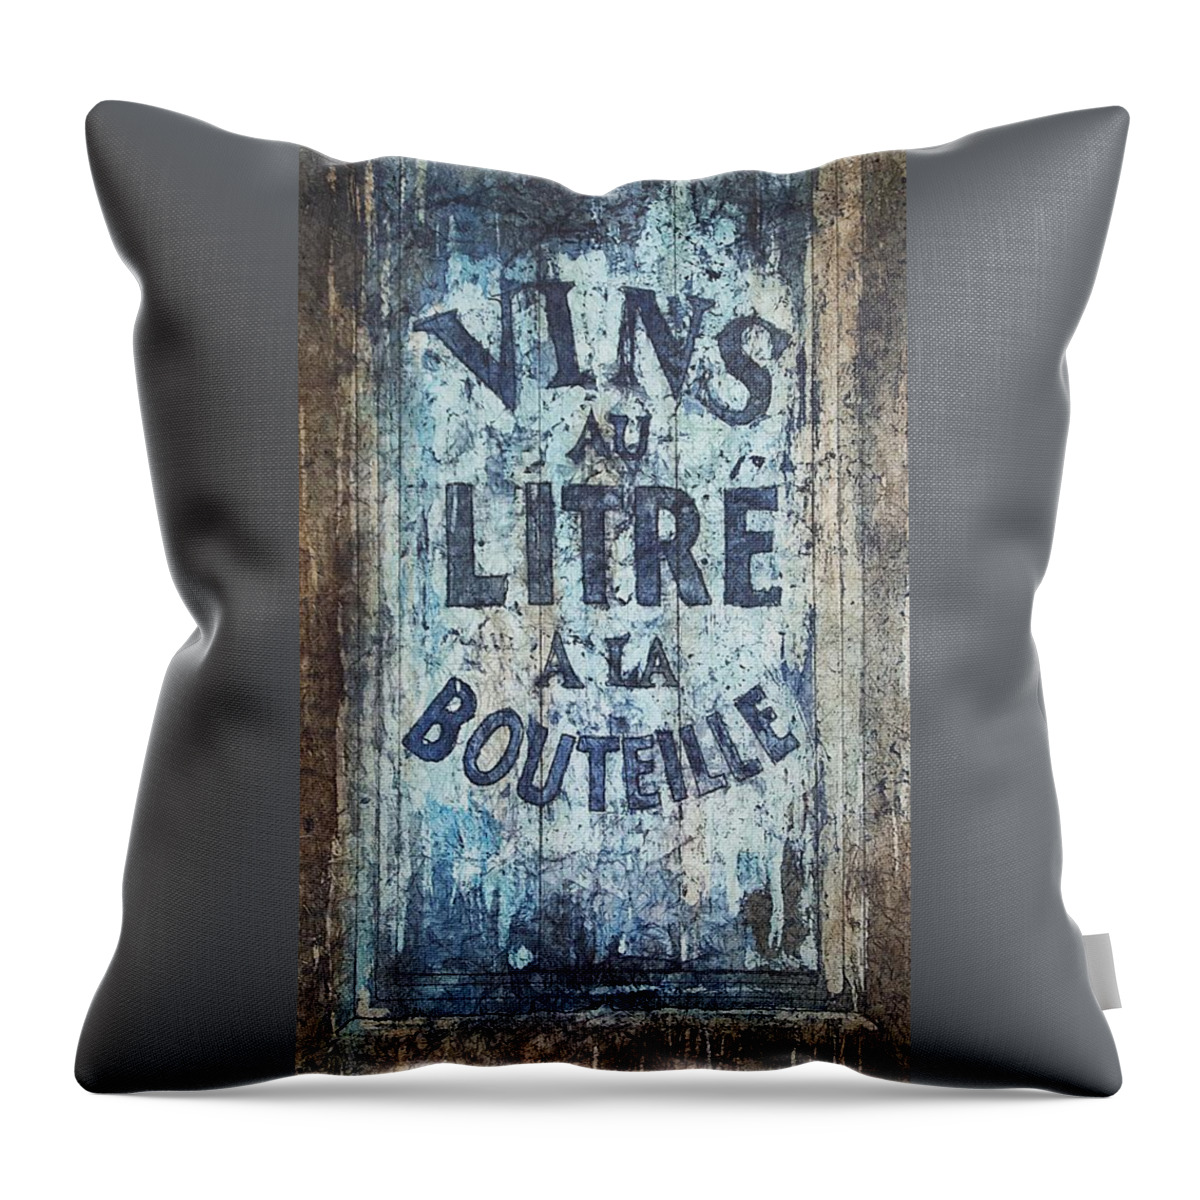 Wine Throw Pillow featuring the painting Vins au Litre by Diane Fujimoto